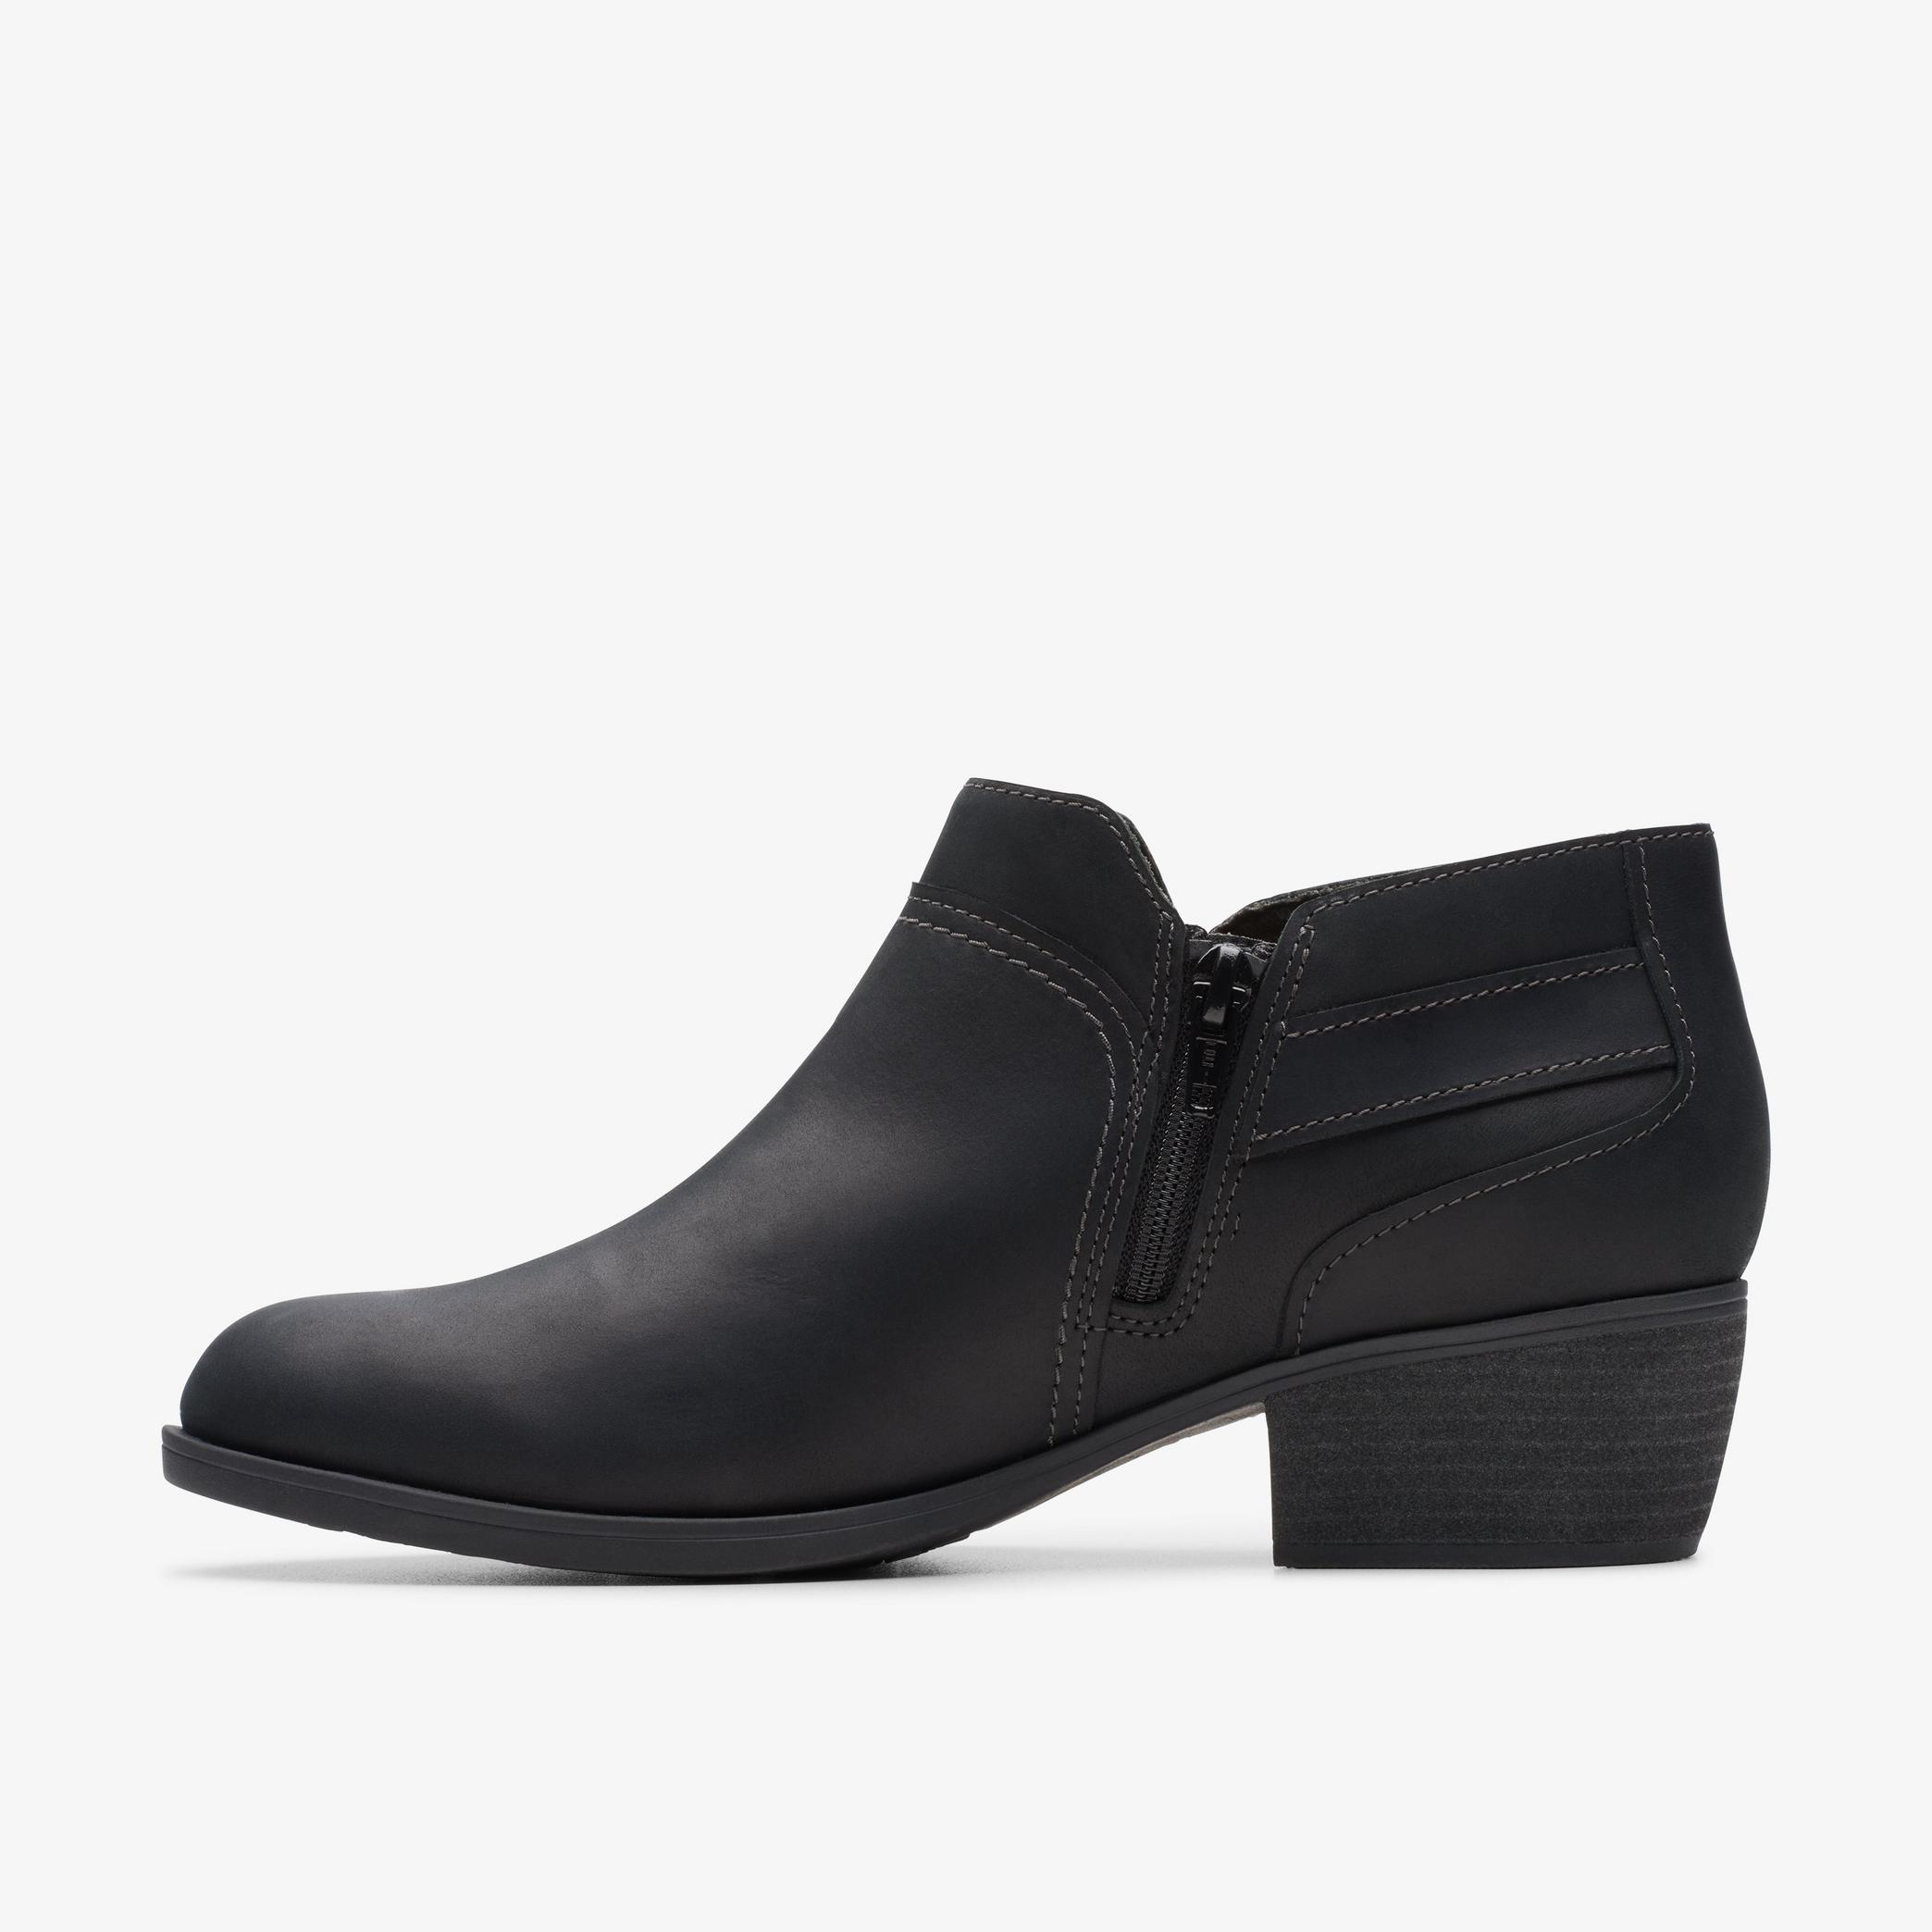 WOMENS Charlten Grace Black Oily Leather Ankle Boots | Clarks US